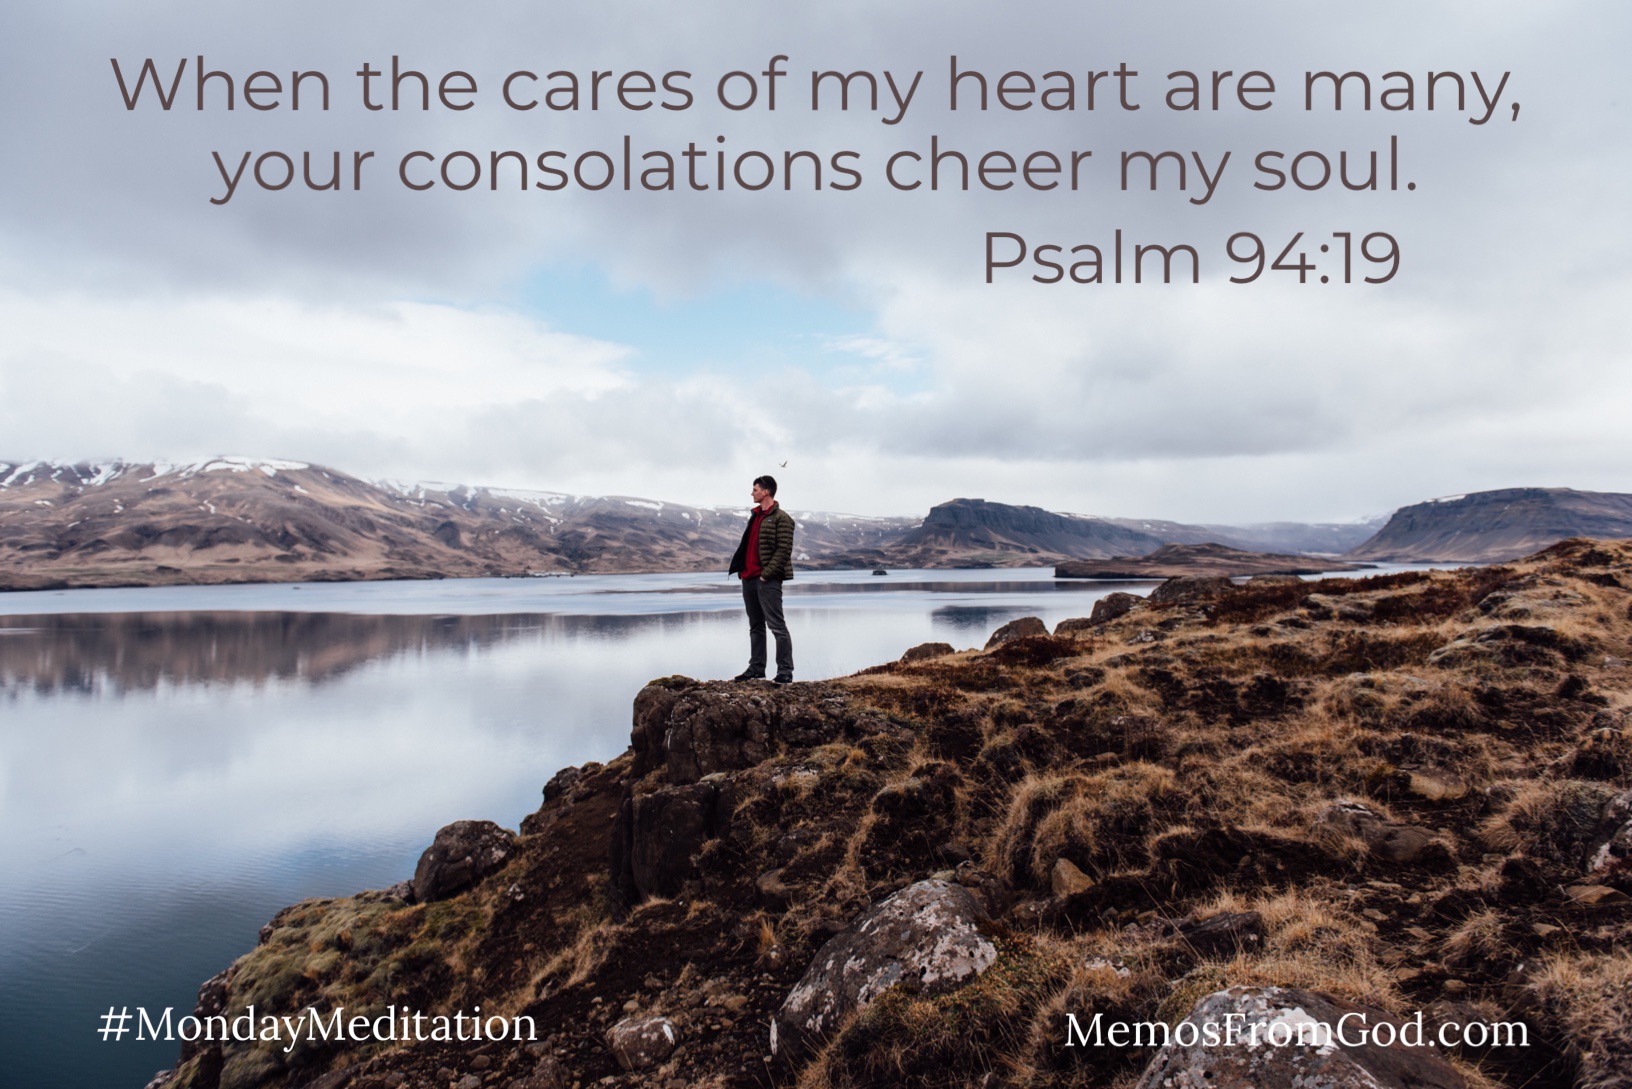 A man standing on a rocky shore looking out at the still water of a lake with a mountain in the background. Caption: When the cares of my heart are many, your consolations cheer my soul. Psalm 94:19